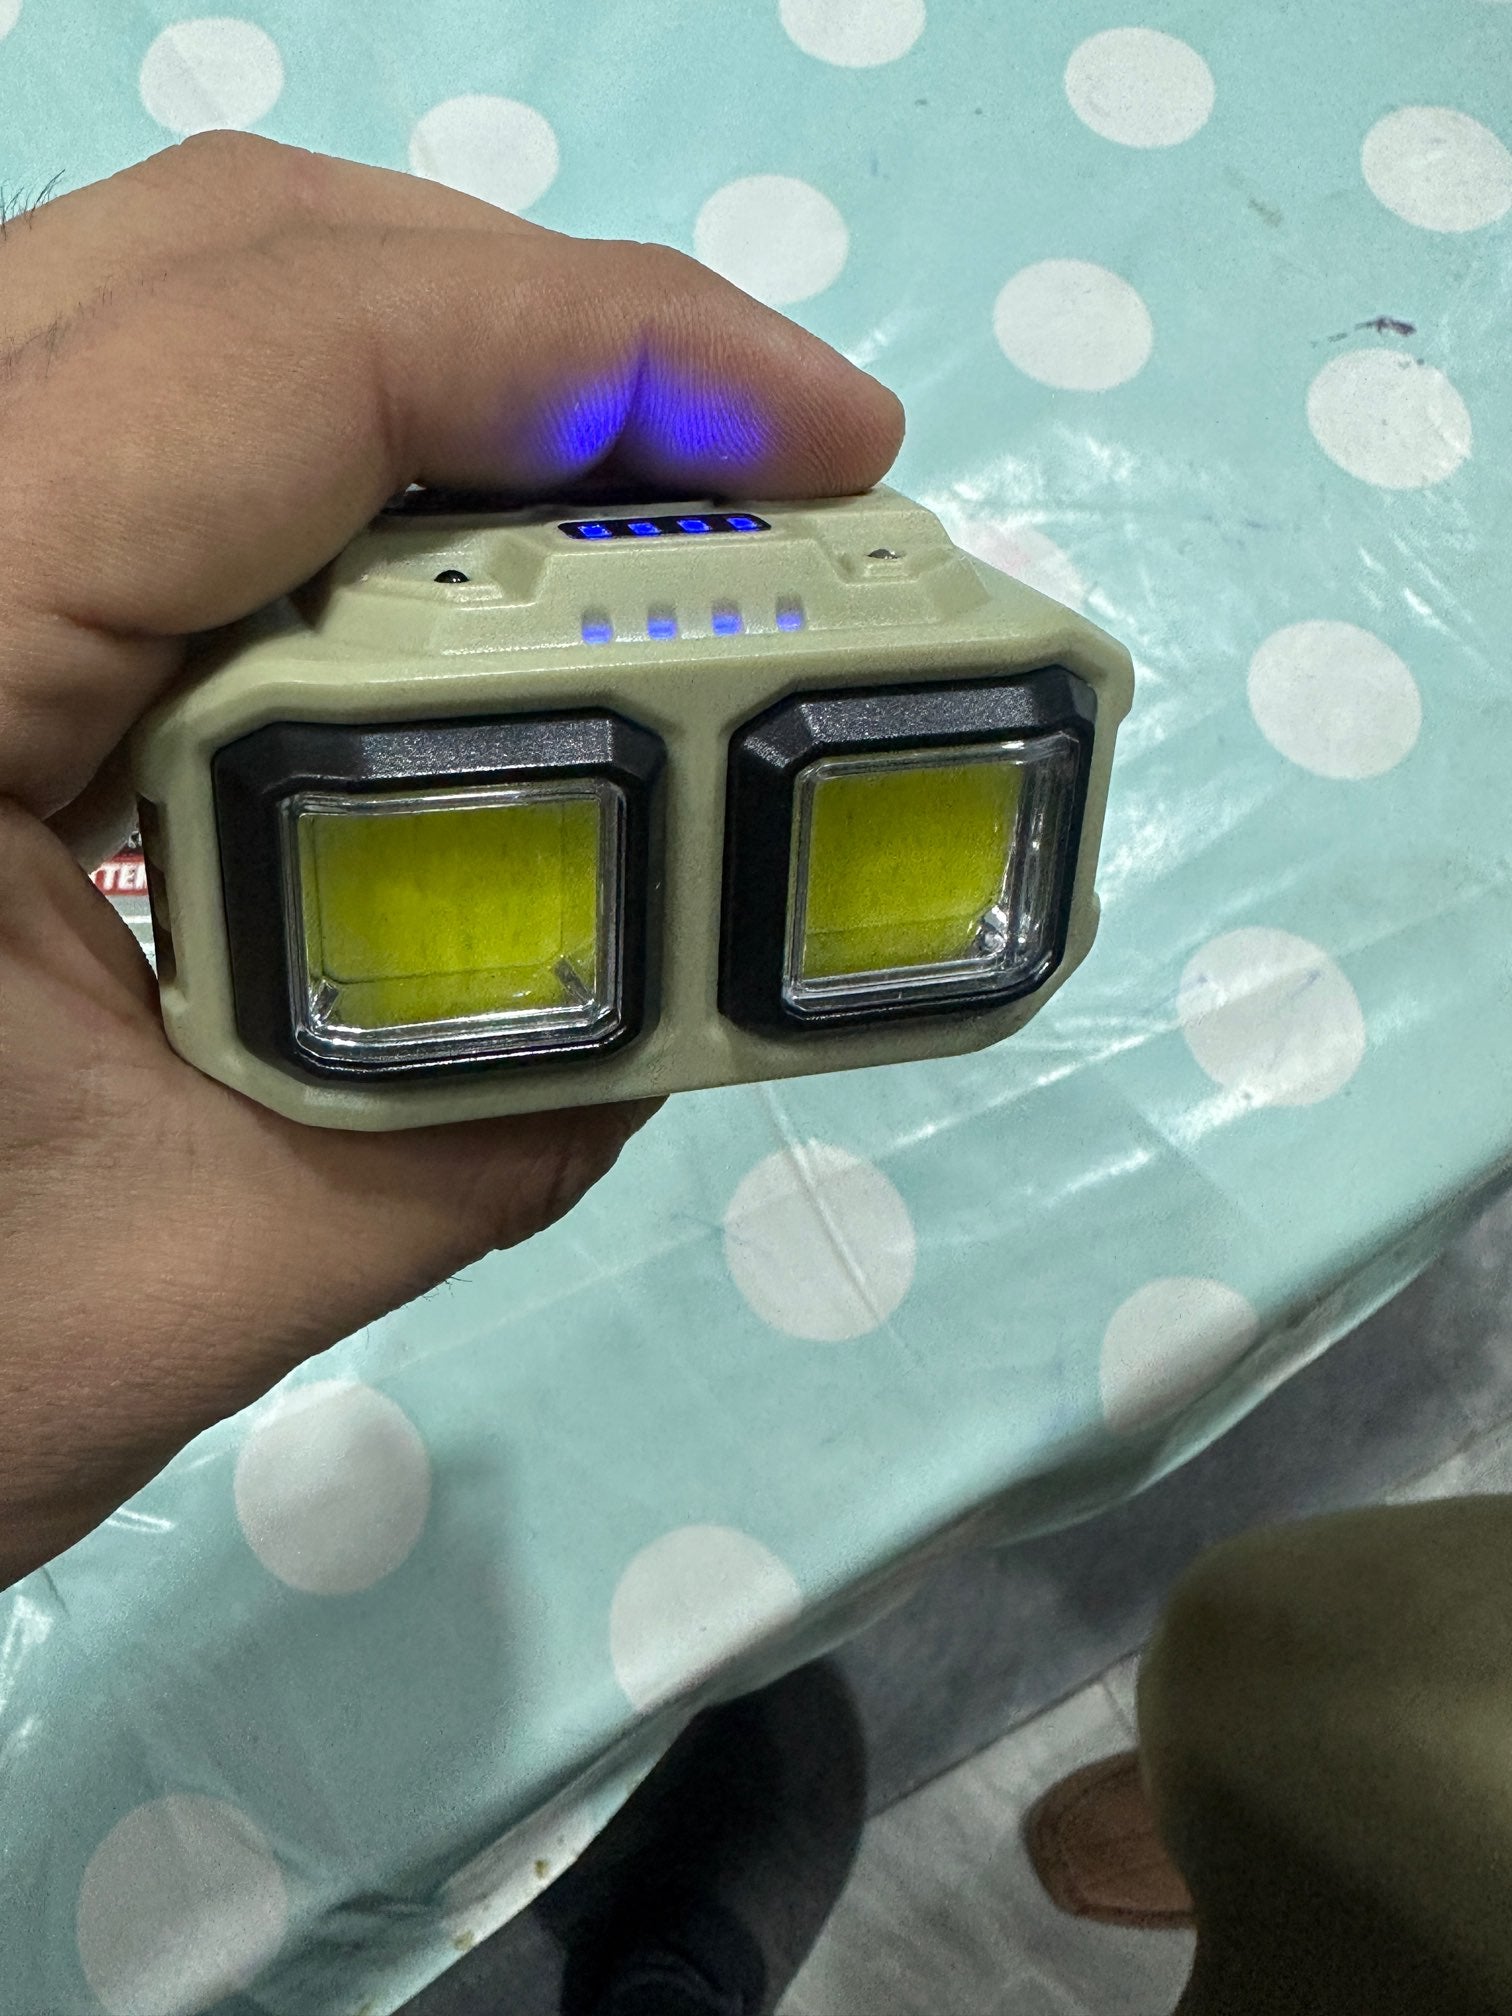 Lot imported Bright HeadLights with sensor